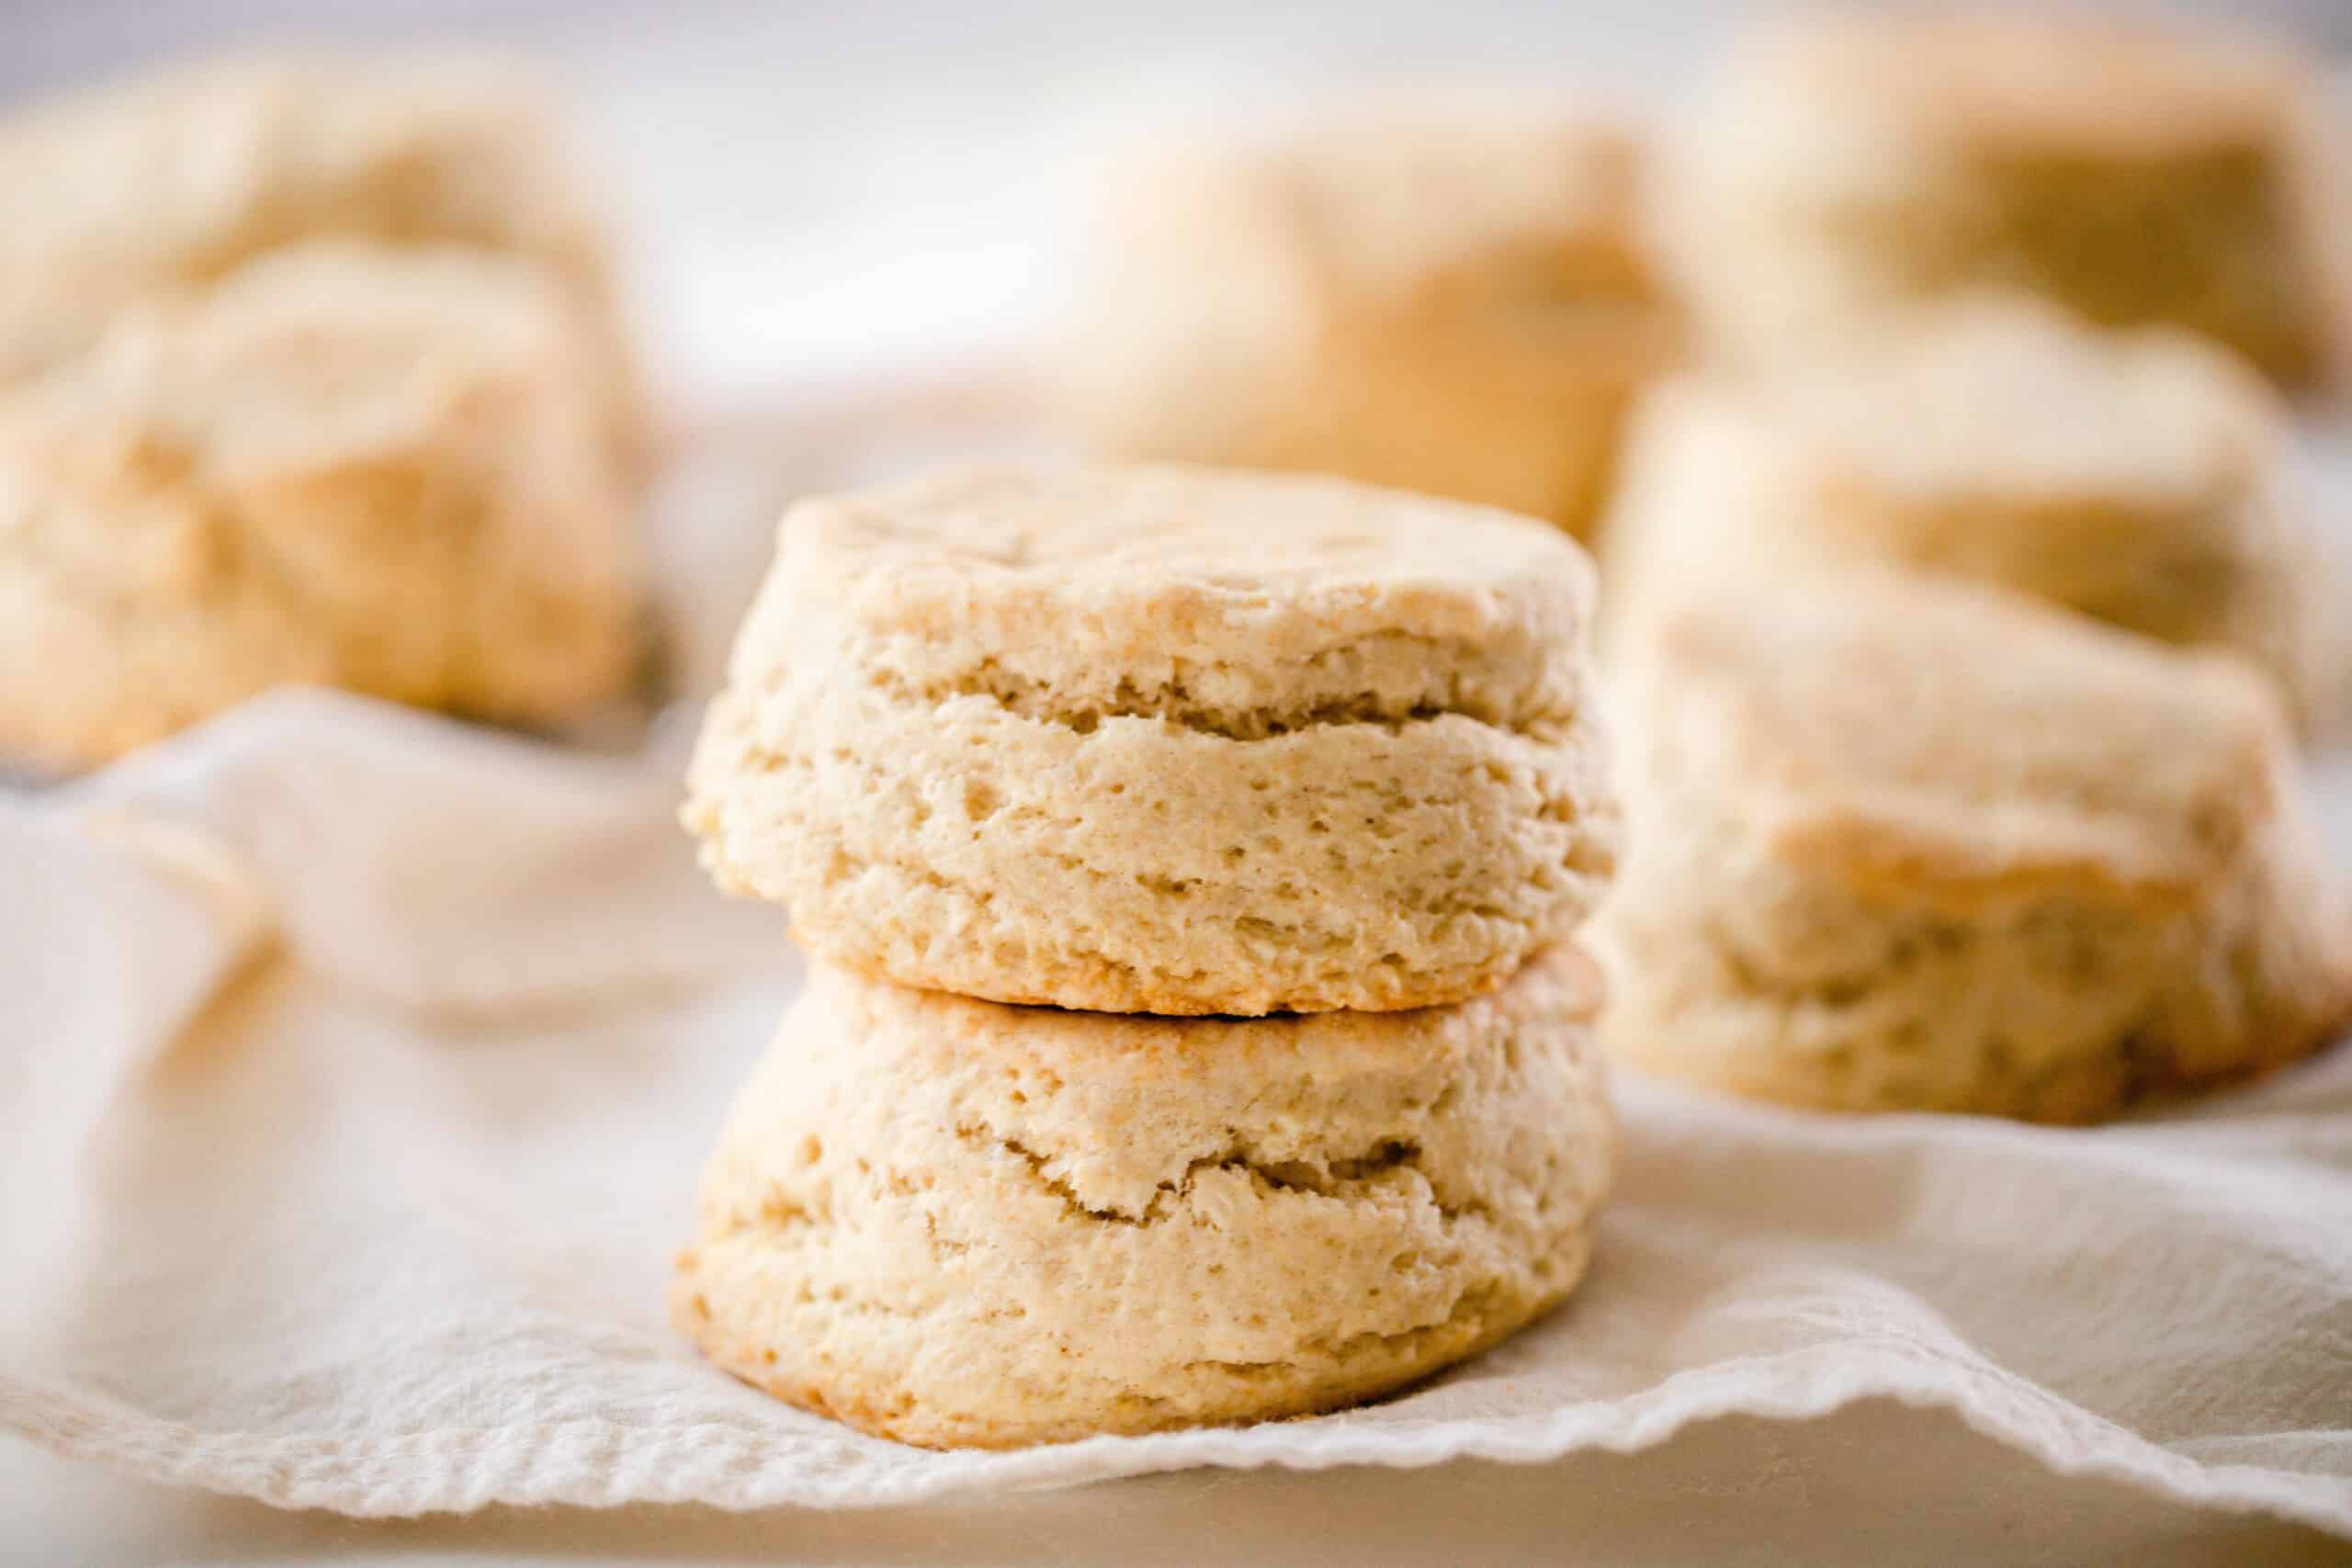 two fluffy sourdough biscuits stacked on top each other on a linen towel with stacks of more biscuits in the background